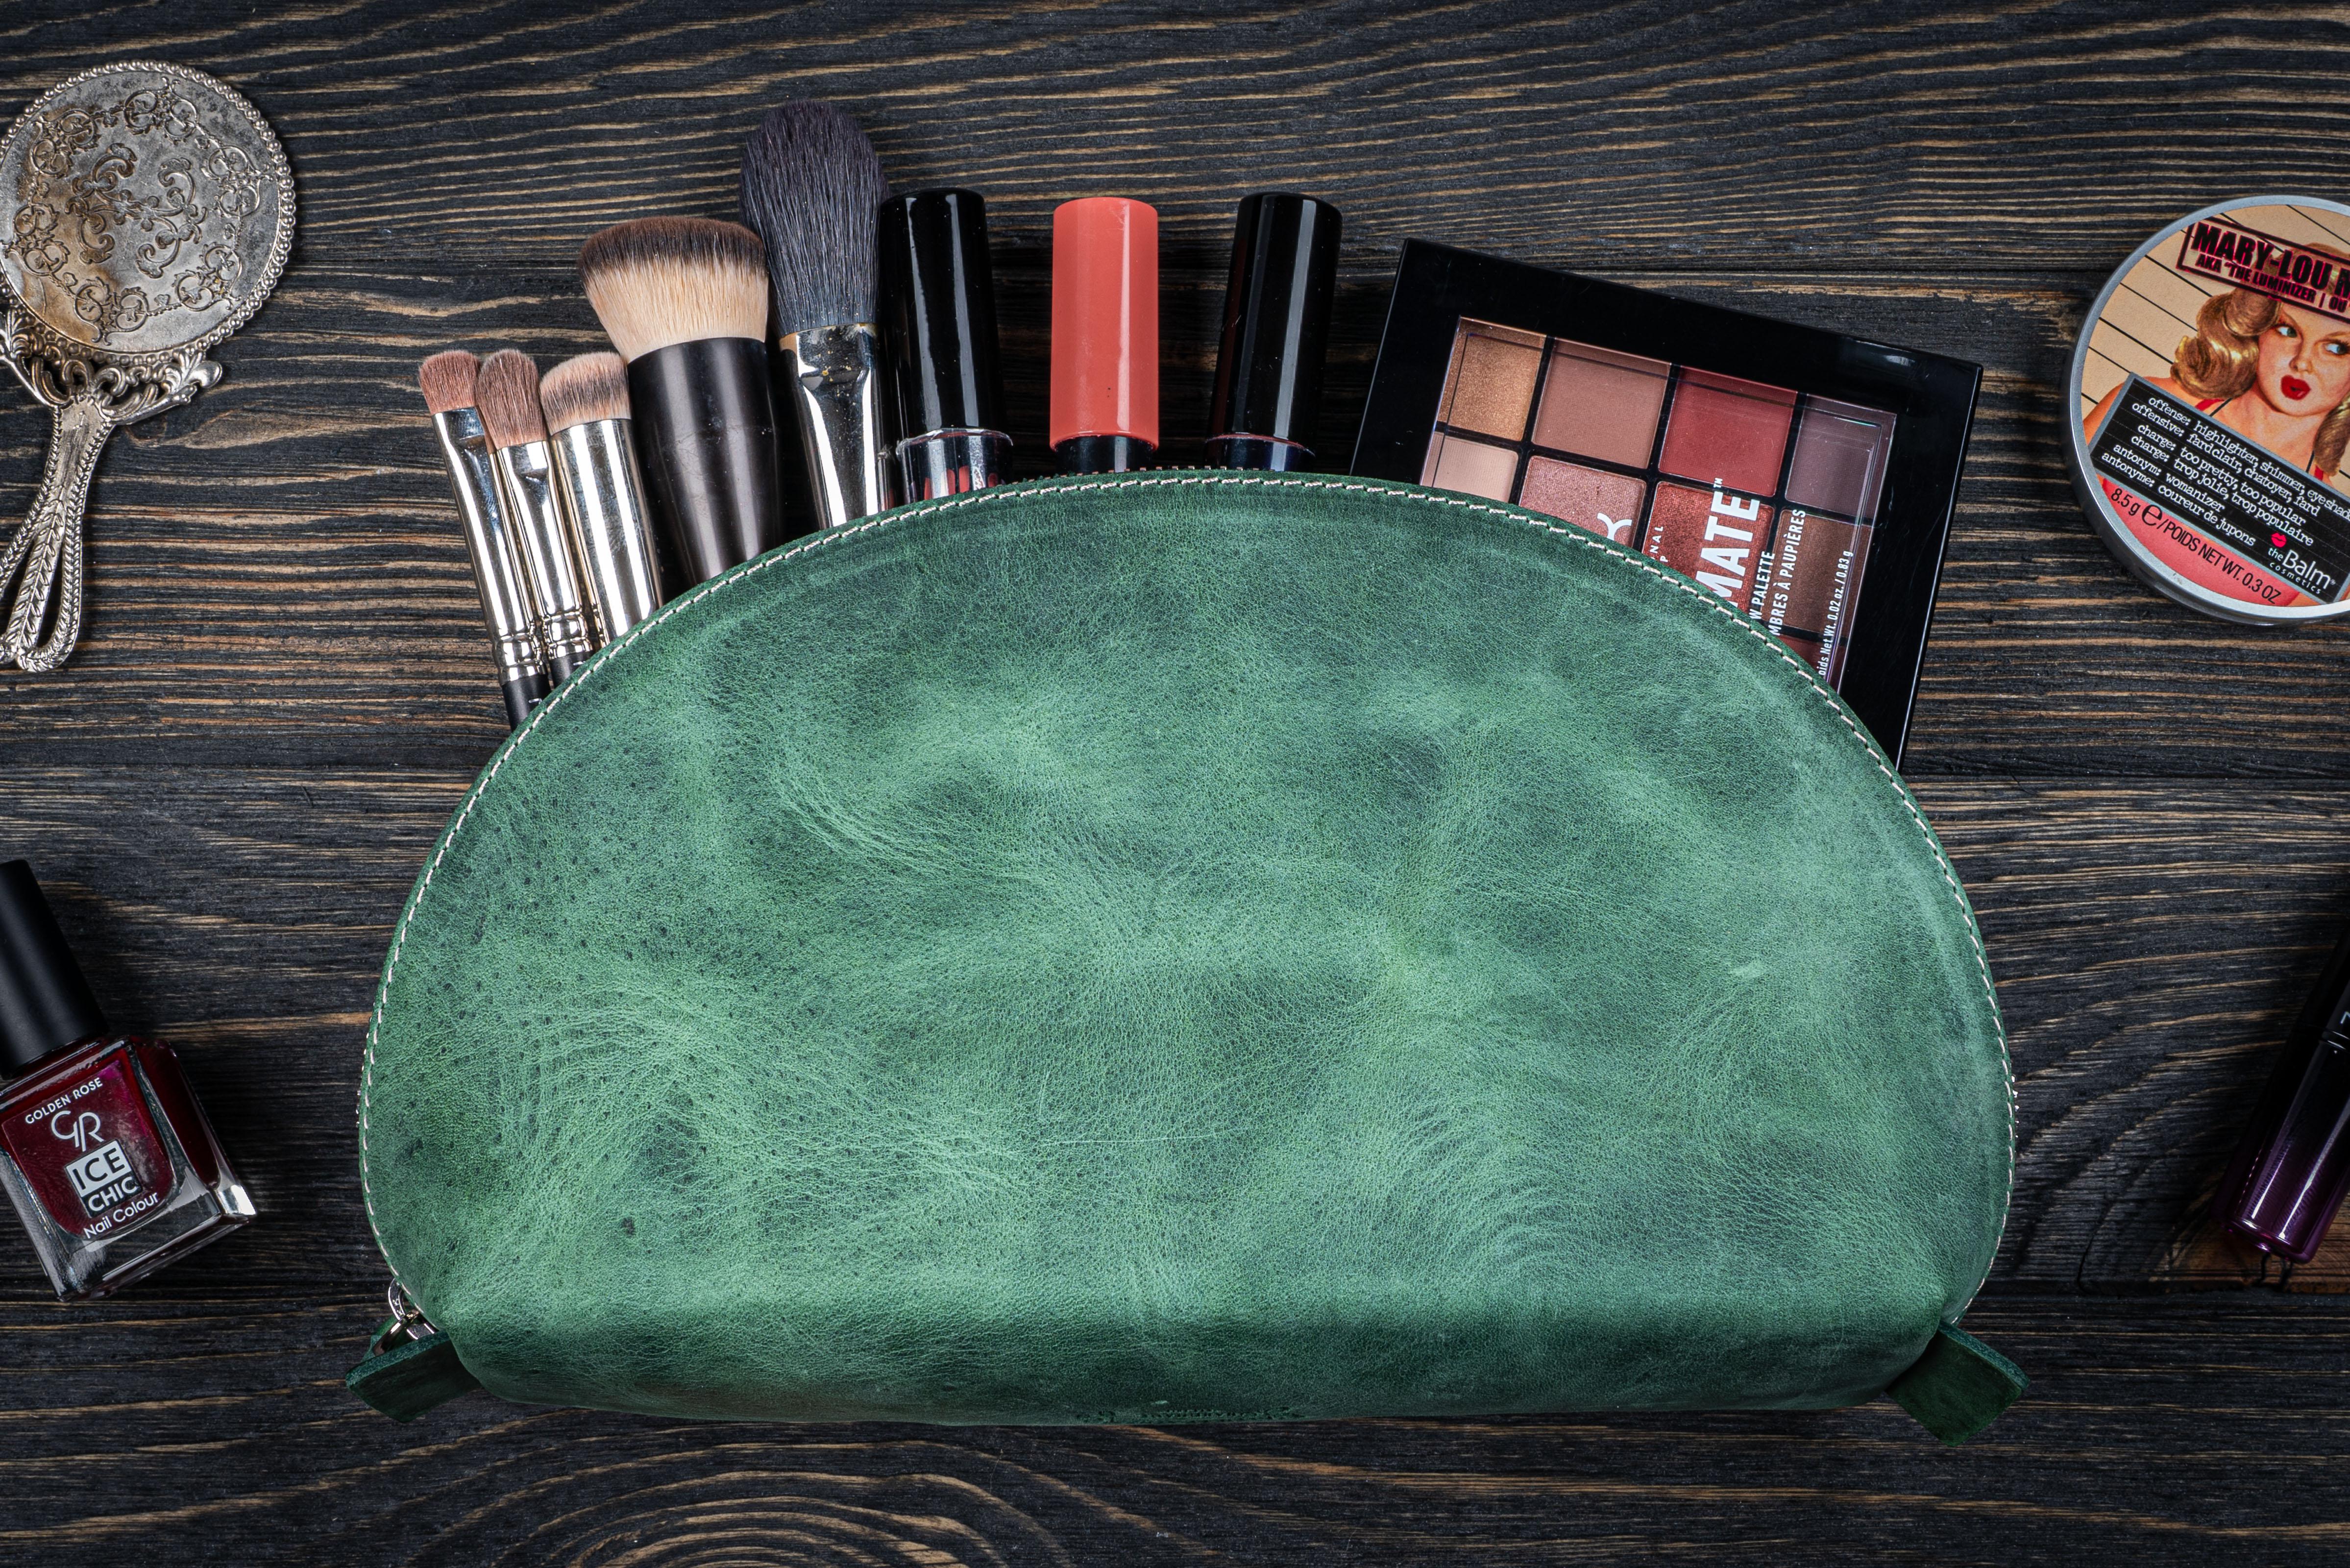 Leather Lunar Makeup / Toiletry Bag - Crazy Horse Forest Green